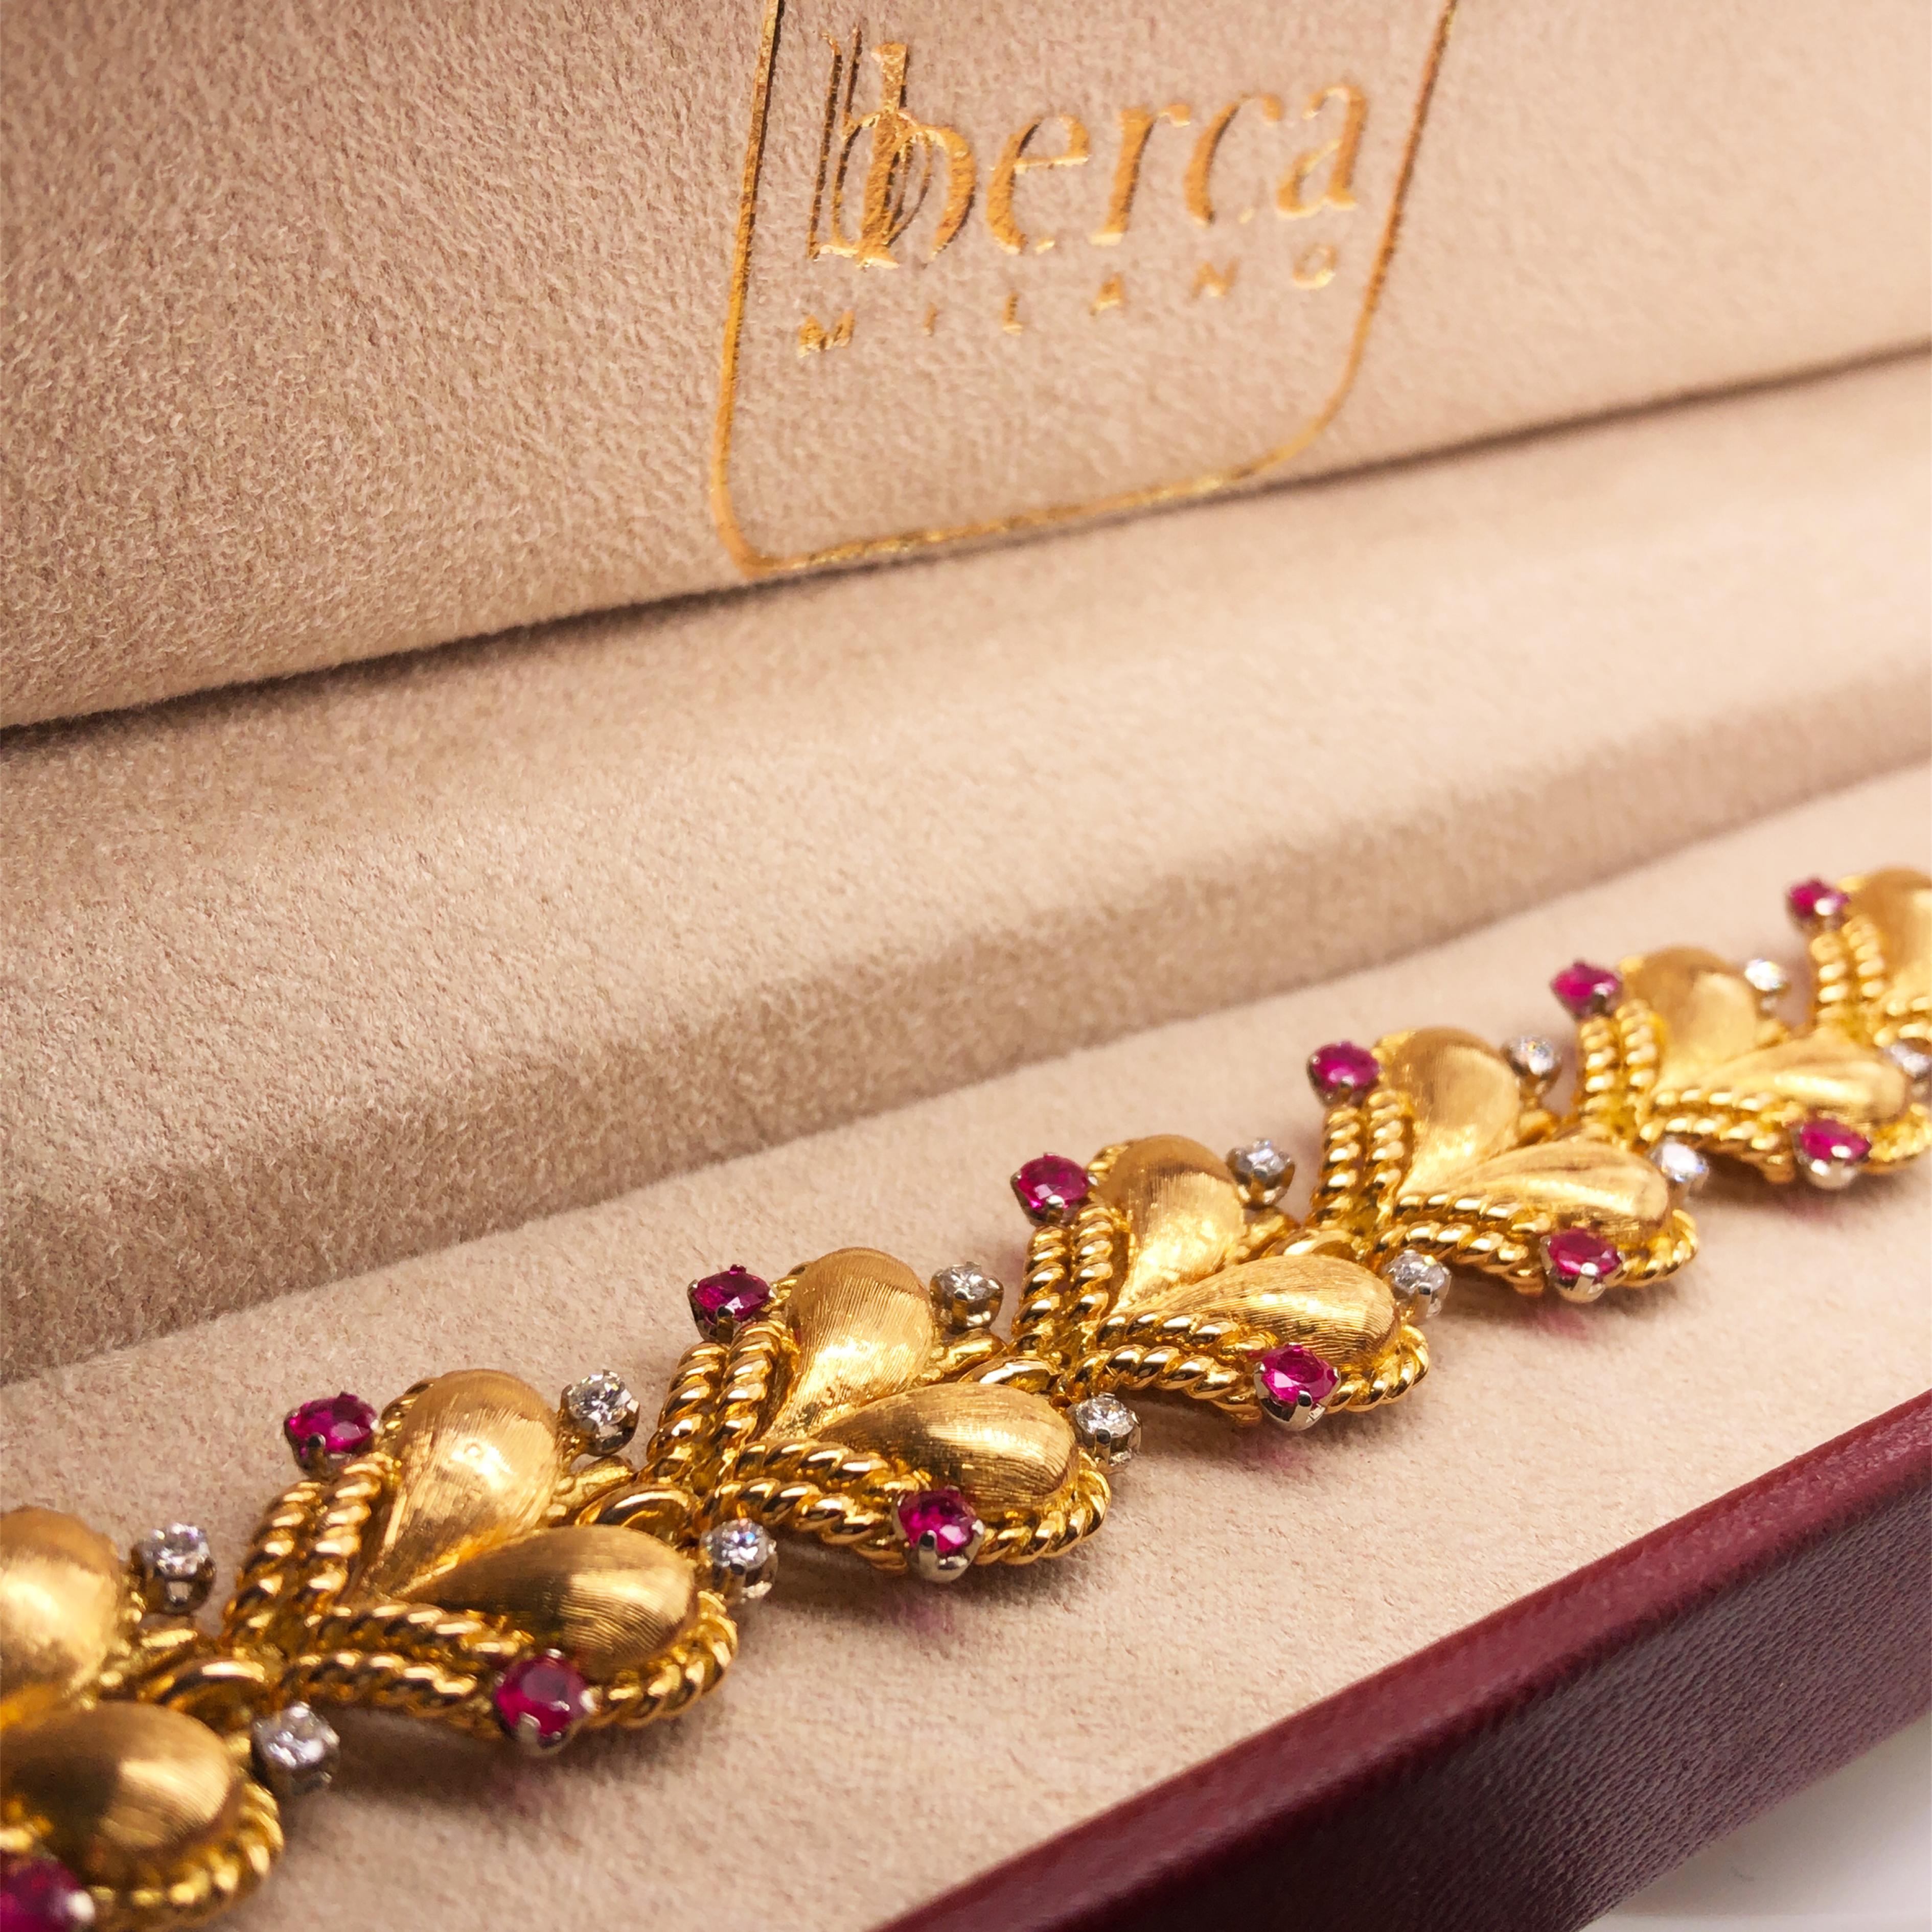 One-of-a-kind, awesome, Mario Buccellati Heart Bracelet featuring 2.20Kt burma rubies and 1.10Kt white diamond in a handcrafted yellow and white gold brushed and polished setting.
Buccellati has remained a family owned luxury jeweler for four